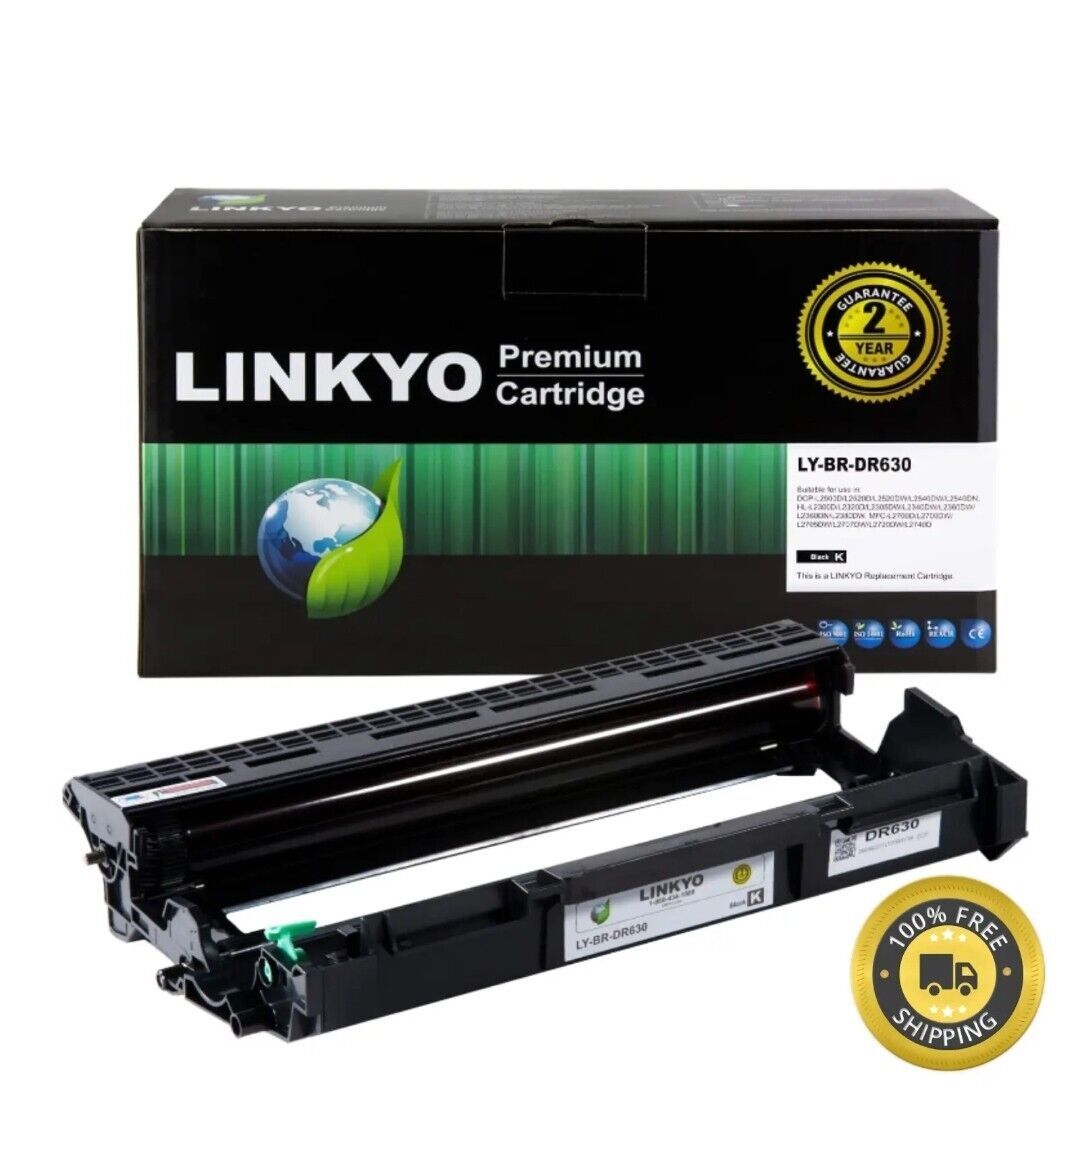 2 LINKYO Compatible Drum Unit Replacement LY-BR-DR630 Brother HL, DCP MFC Series